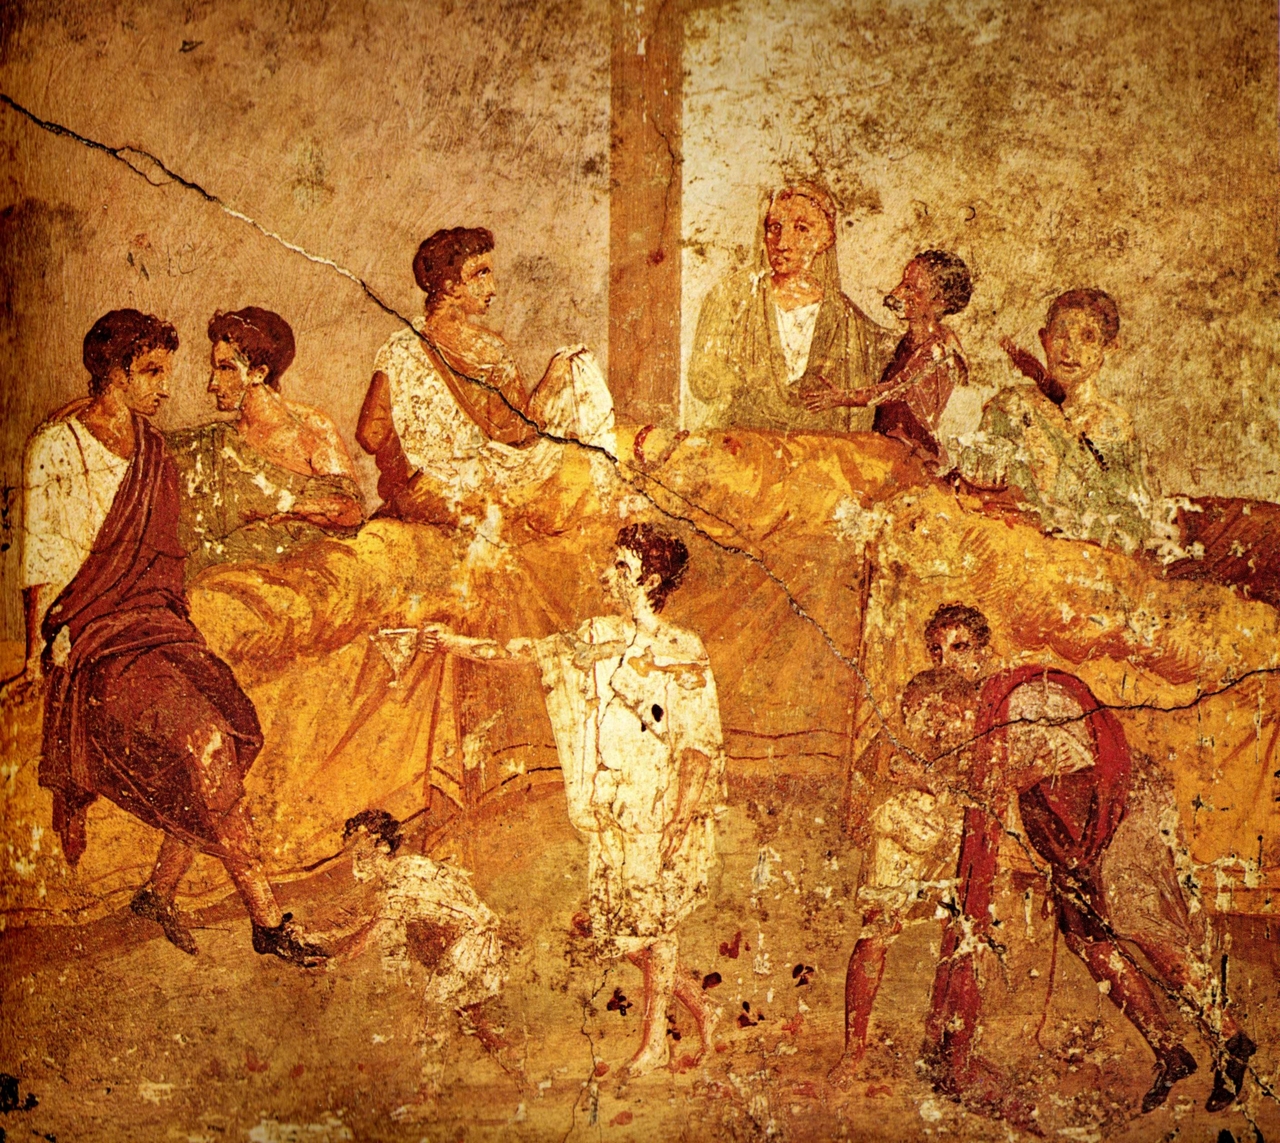 Vomitoriums were not used for vomiting, and it was not customary to vomit between courses while dining in ancient Rome. Vomitoriums were the entrances through which Roman crowds entered and exited stadiums. More info in <a href="http://books.google.com/books?id=YGYwlMZ3ursC&pg=PA153&dq=vomitorium+misconception&hl=en#v=onepage&q=vomitorium%20misconception&f=false" target="_blank">A Cabinet of Roman Curiosities</a>.